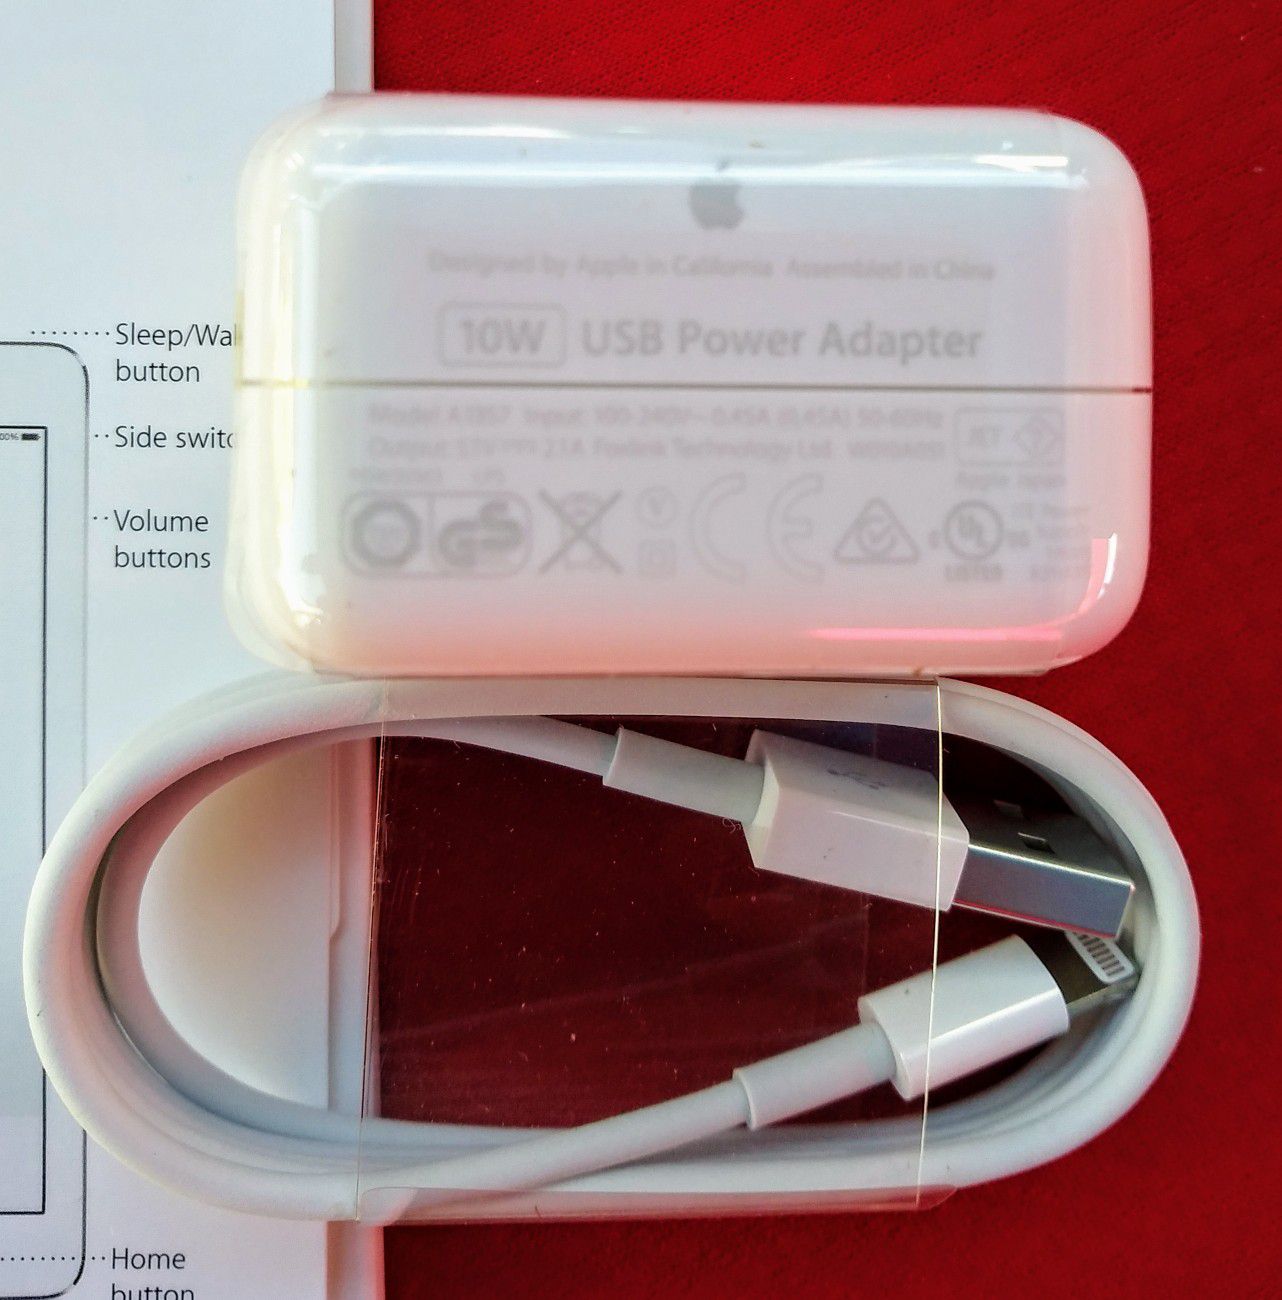 ORIGINAL Apple charger for iphone, iPad air, airpods. Check Description FIRST